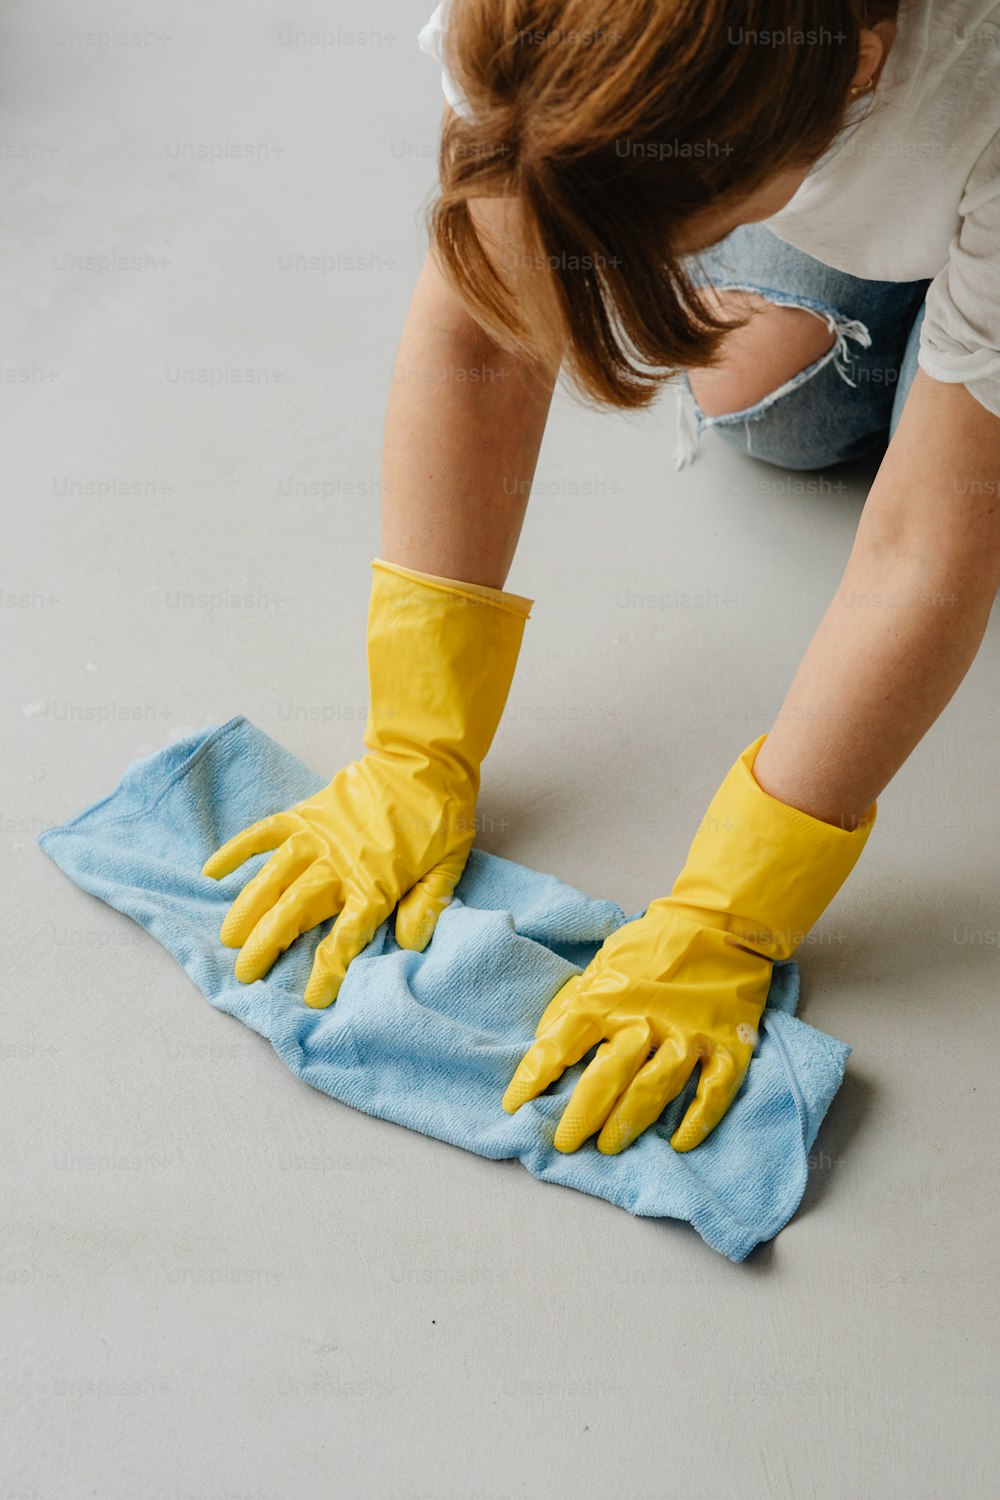 a woman in yellow gloves wiping up a blue towel